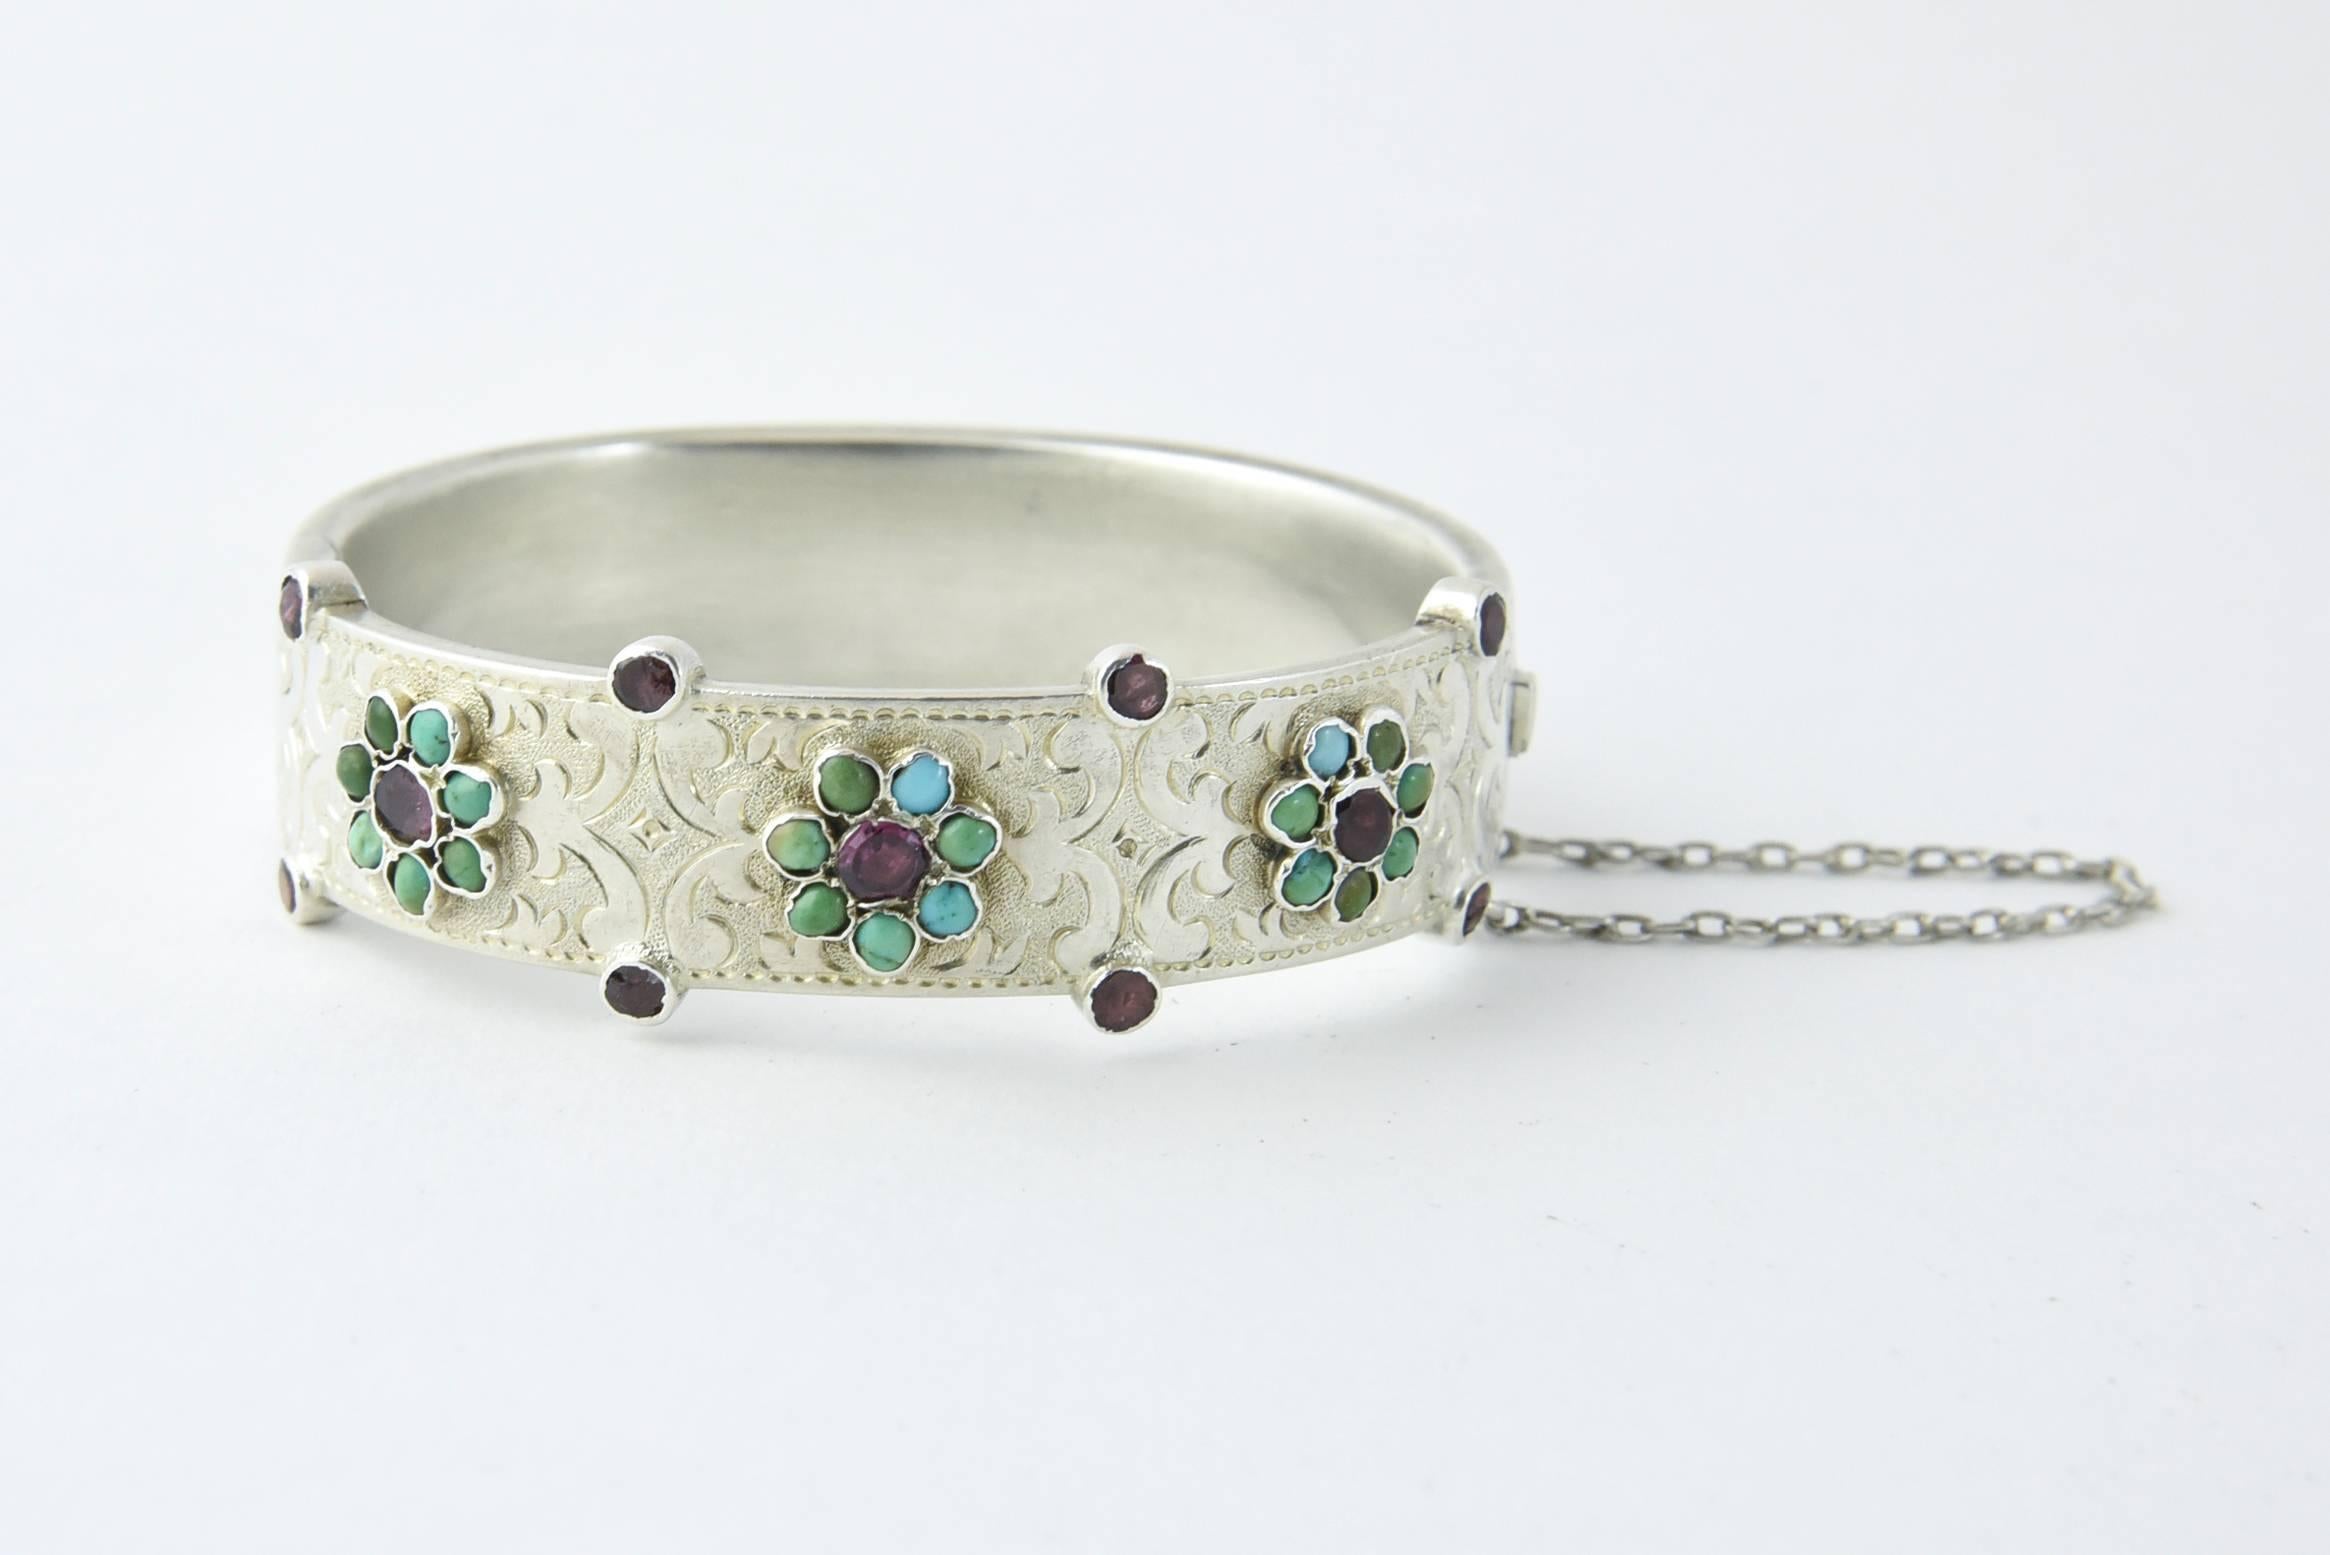 Finely made Austro Hungarian Empire Bangle Circa 1872-1921 
This exquisitely made bangle silver etched bangle has three bezel set turquoise flowers with ruby centers.  The bangle edge is accented with four additional  with bezel set rubies on each